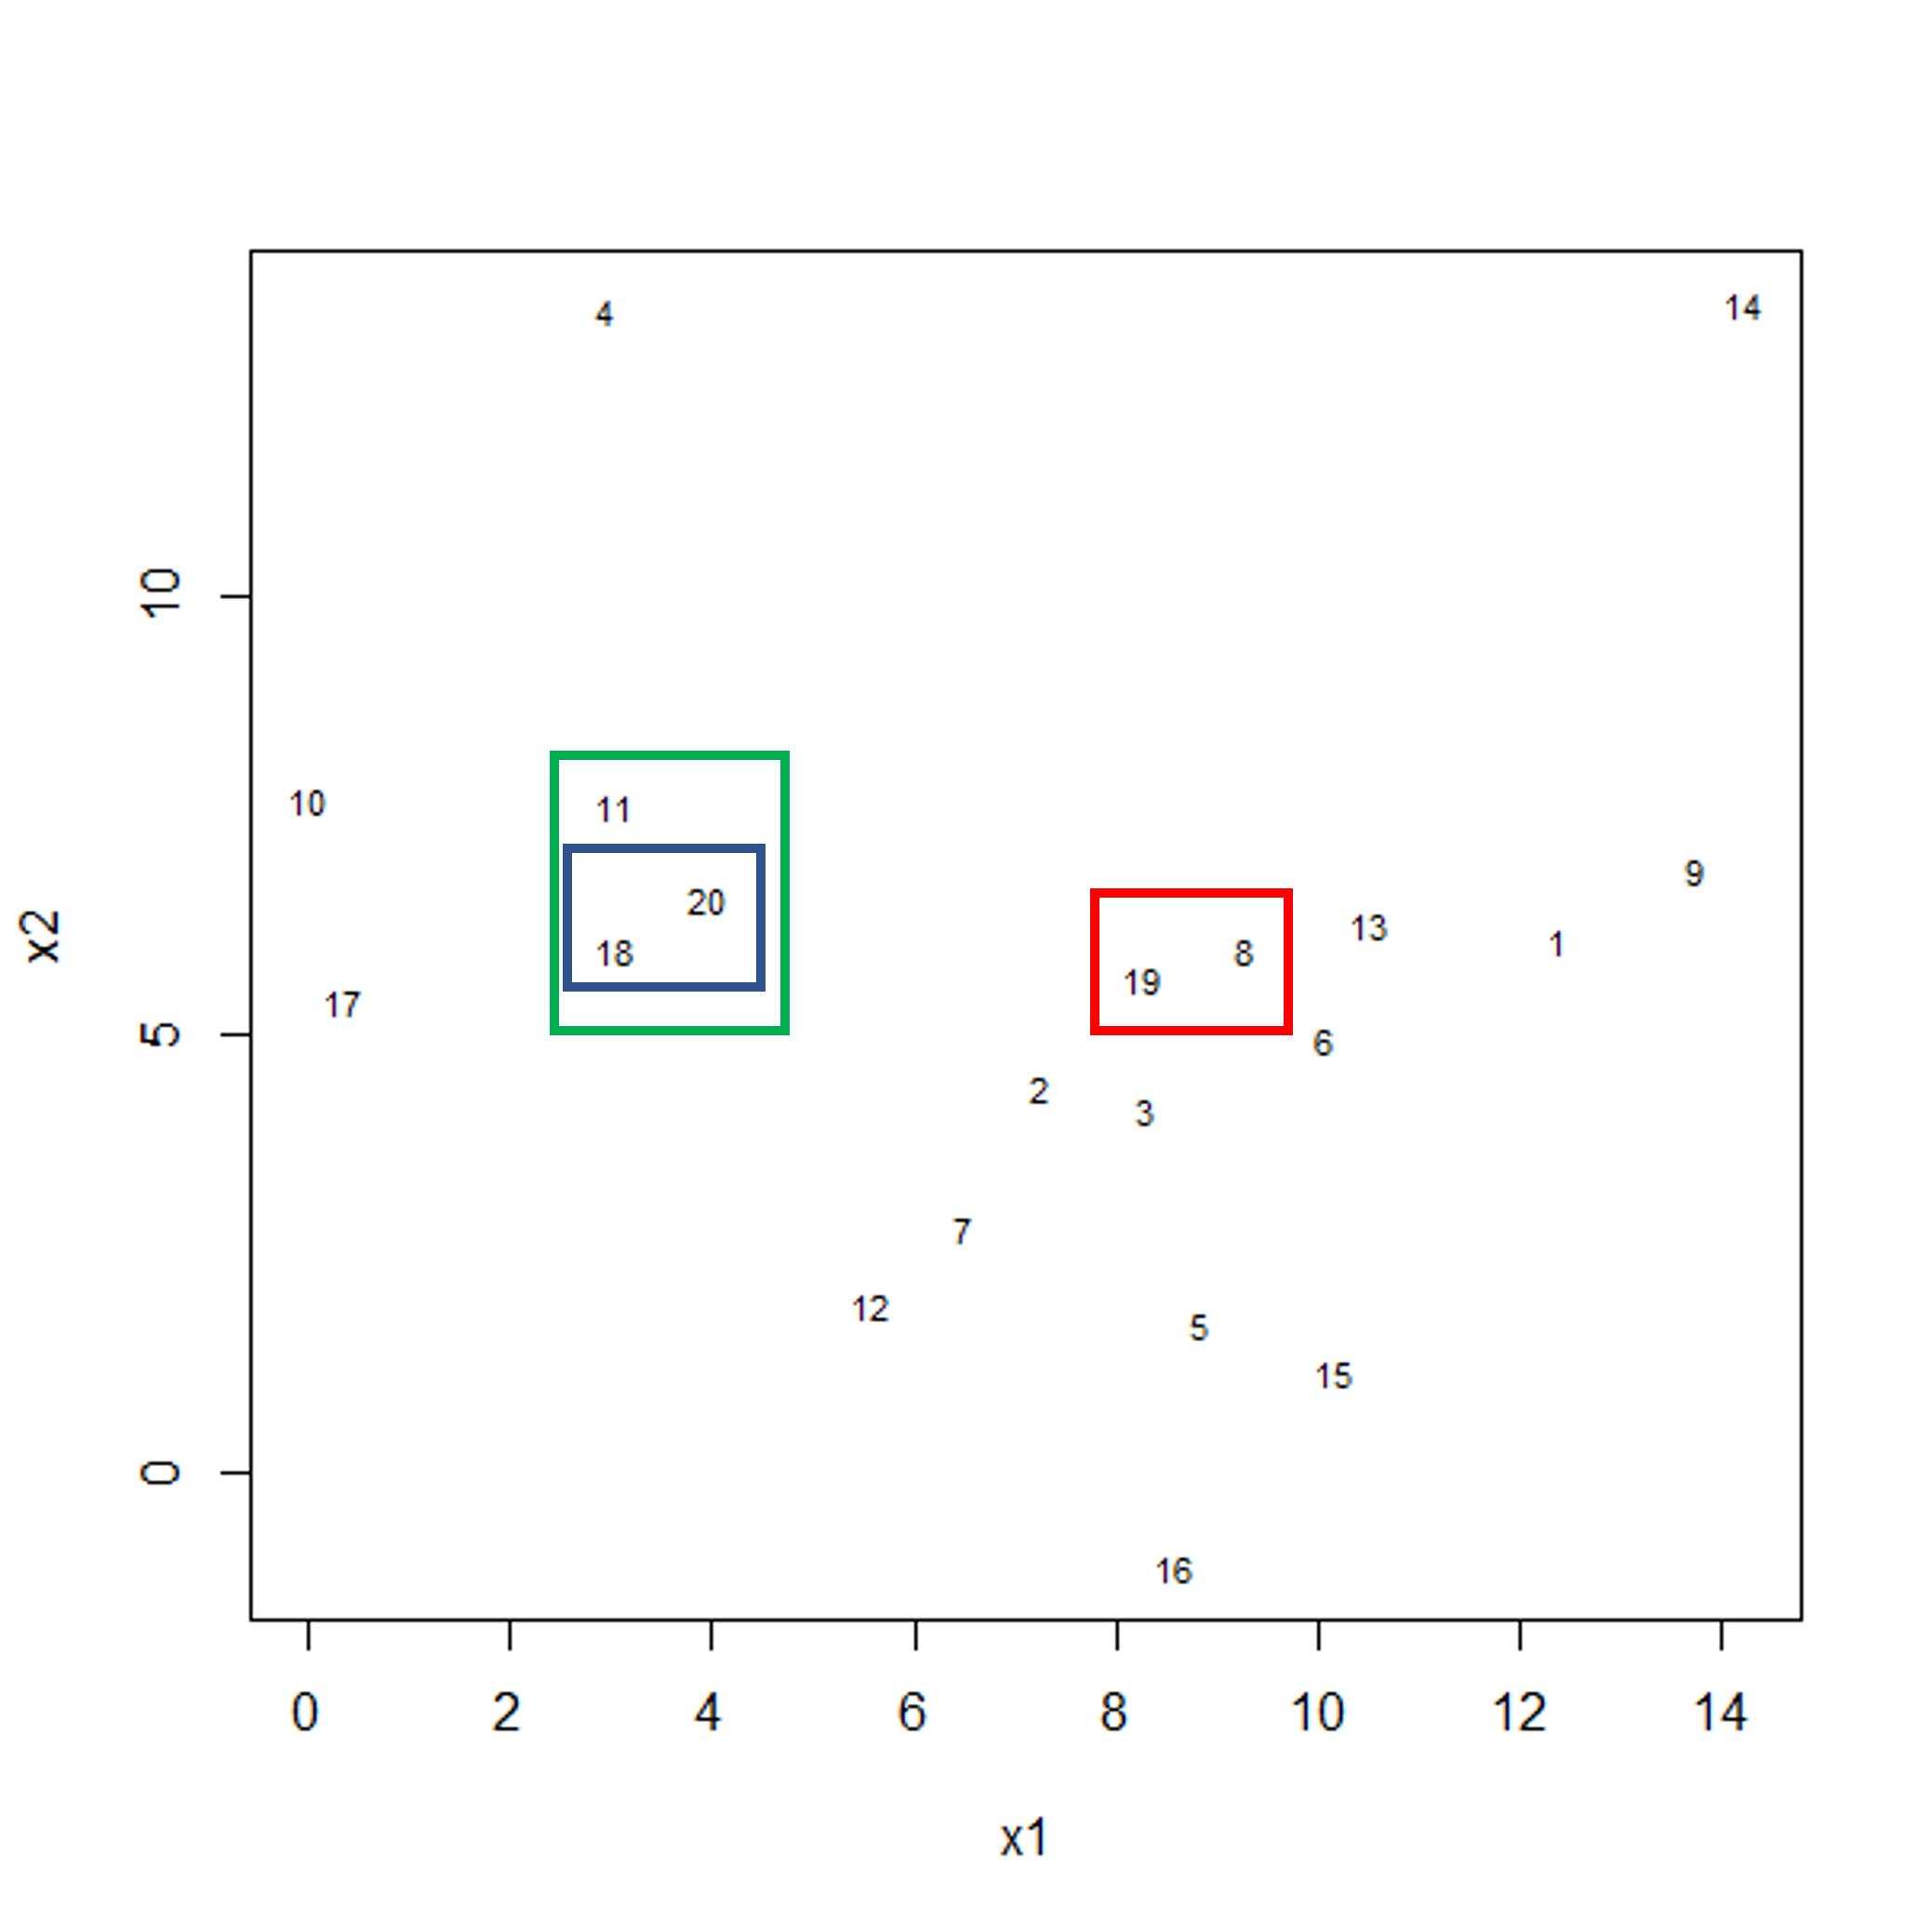 Scatter plot of observations x2 versus x1. Three boxes are shown this time. Blue and red boxes contain two observations each. The two boxes contain points that are relatively far apart. A third green box is shown encompassing the blue box and an additional data point.